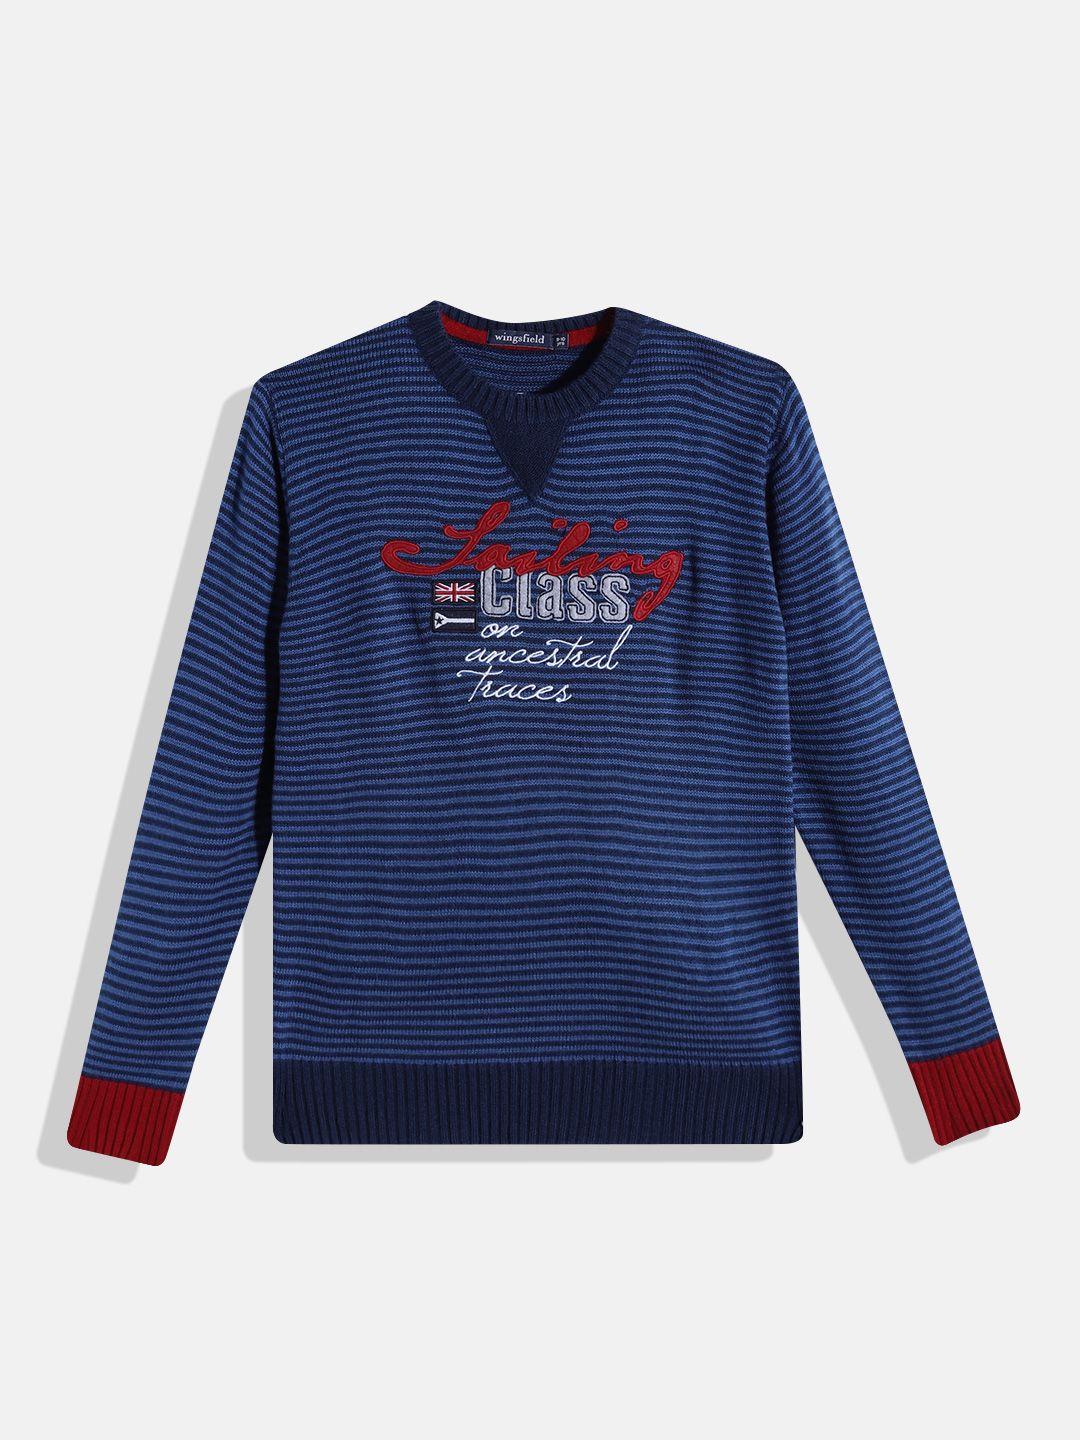 wingsfield boys blue typography printed acrylic pullover